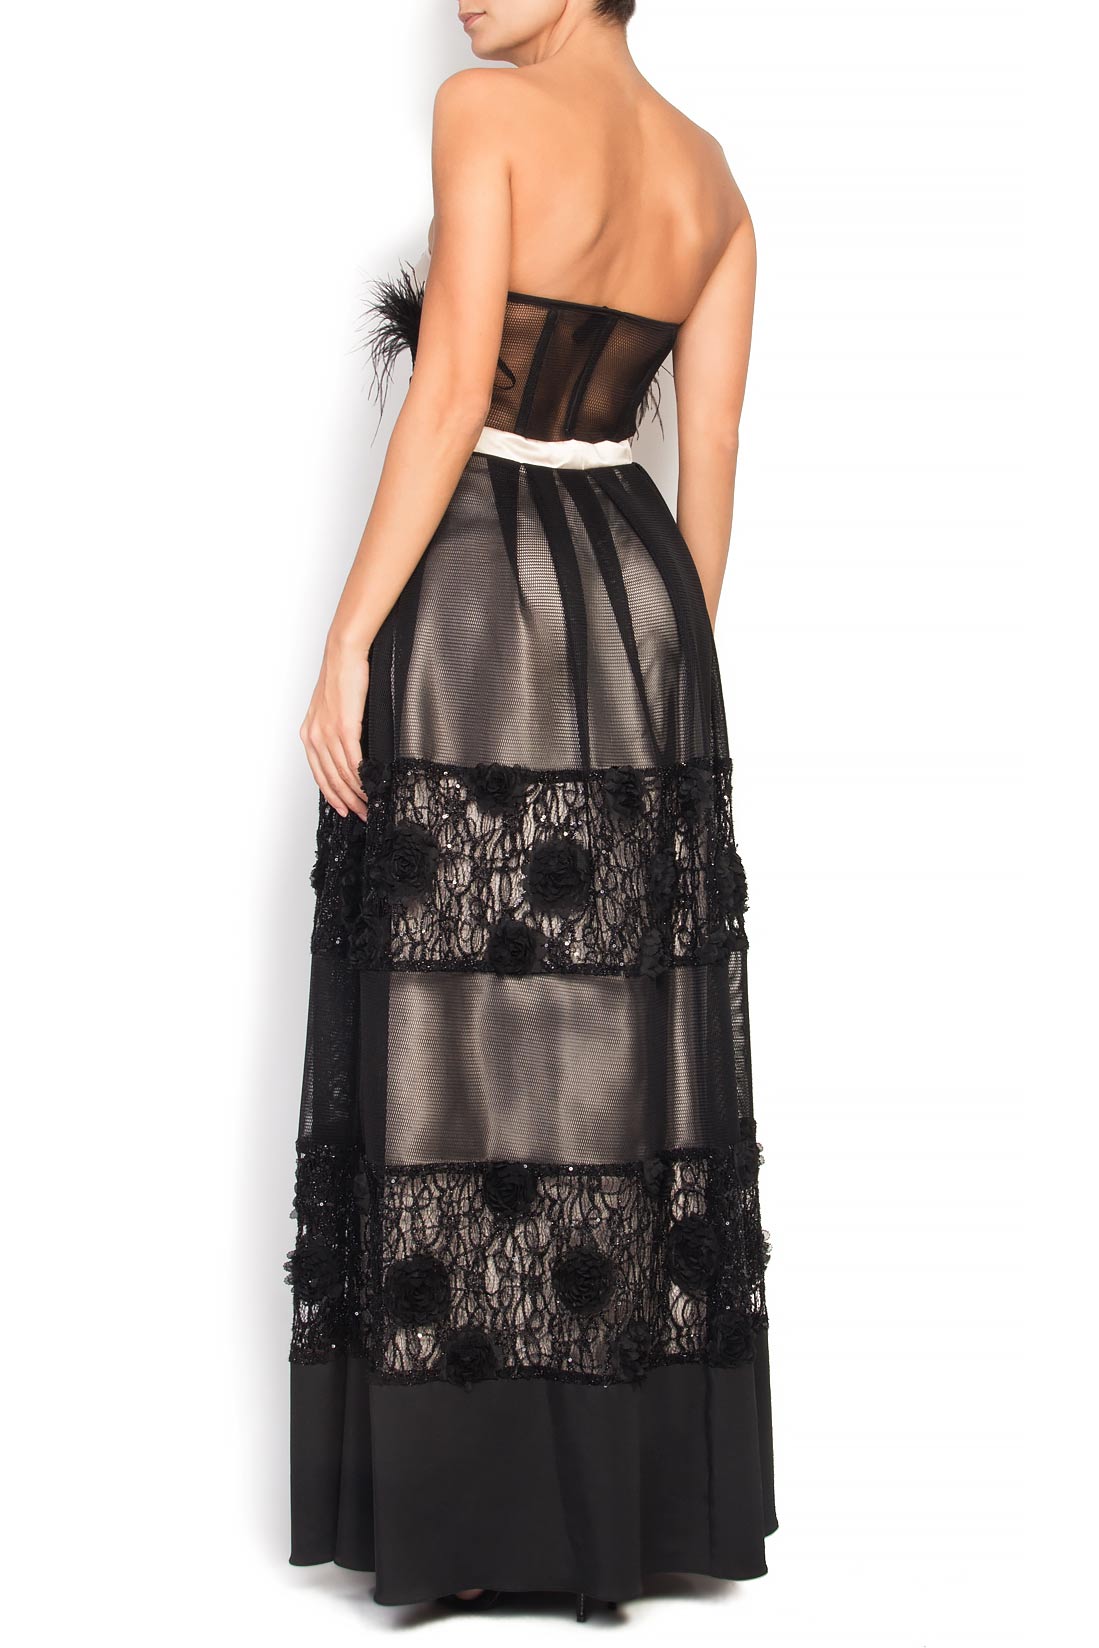 Silk and lace maxi dress with feathers Elena Perseil image 2